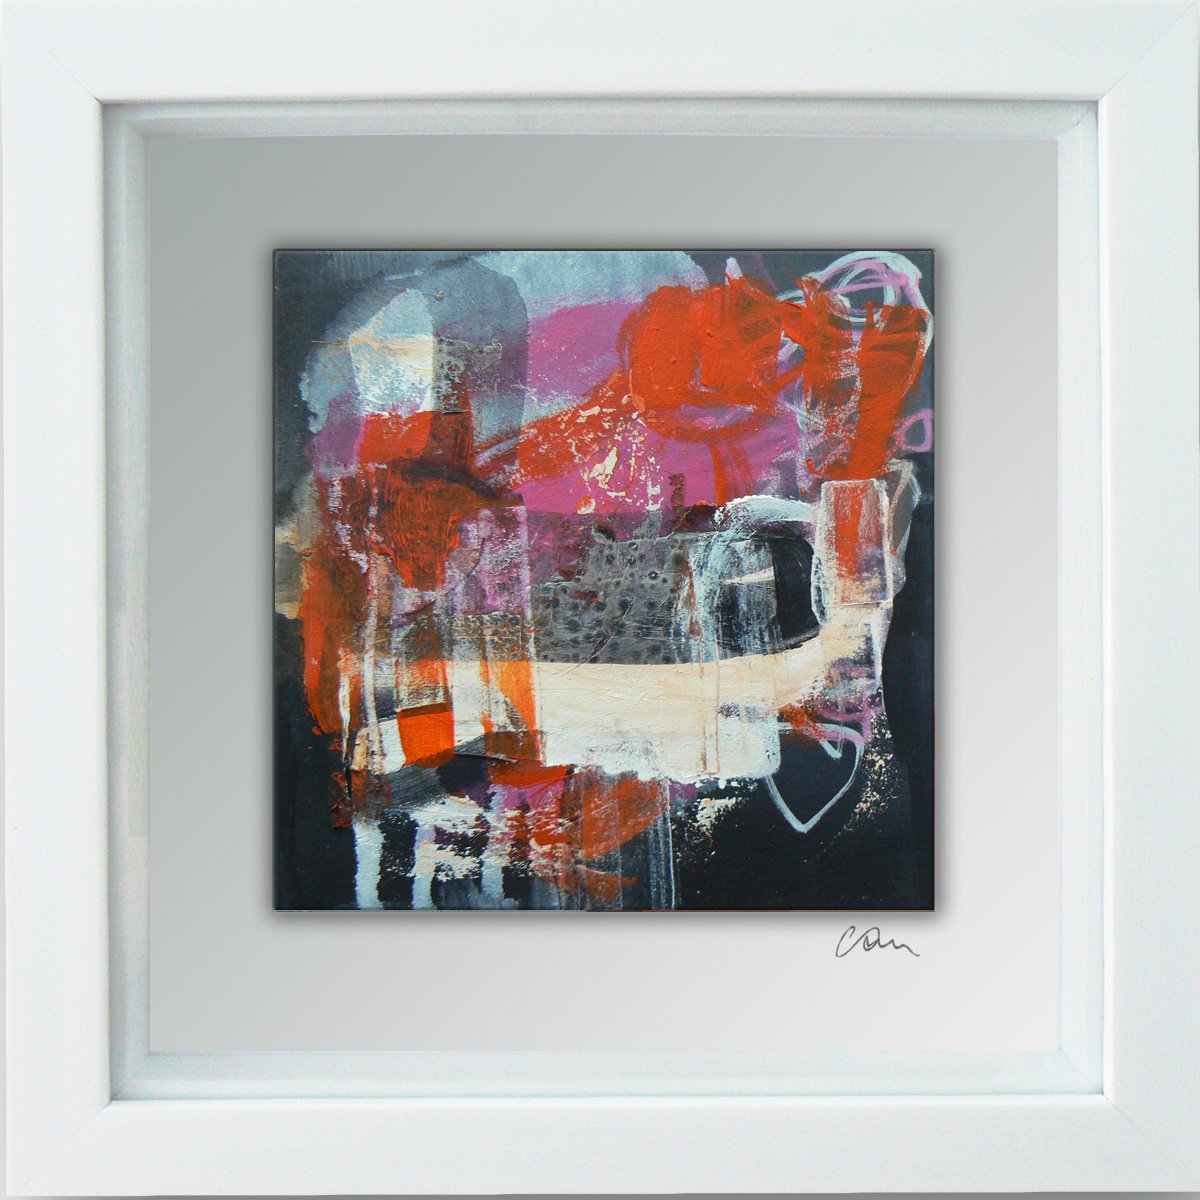 Framed ready to hang original abstract - Chaos #2 by Carolynne Coulson